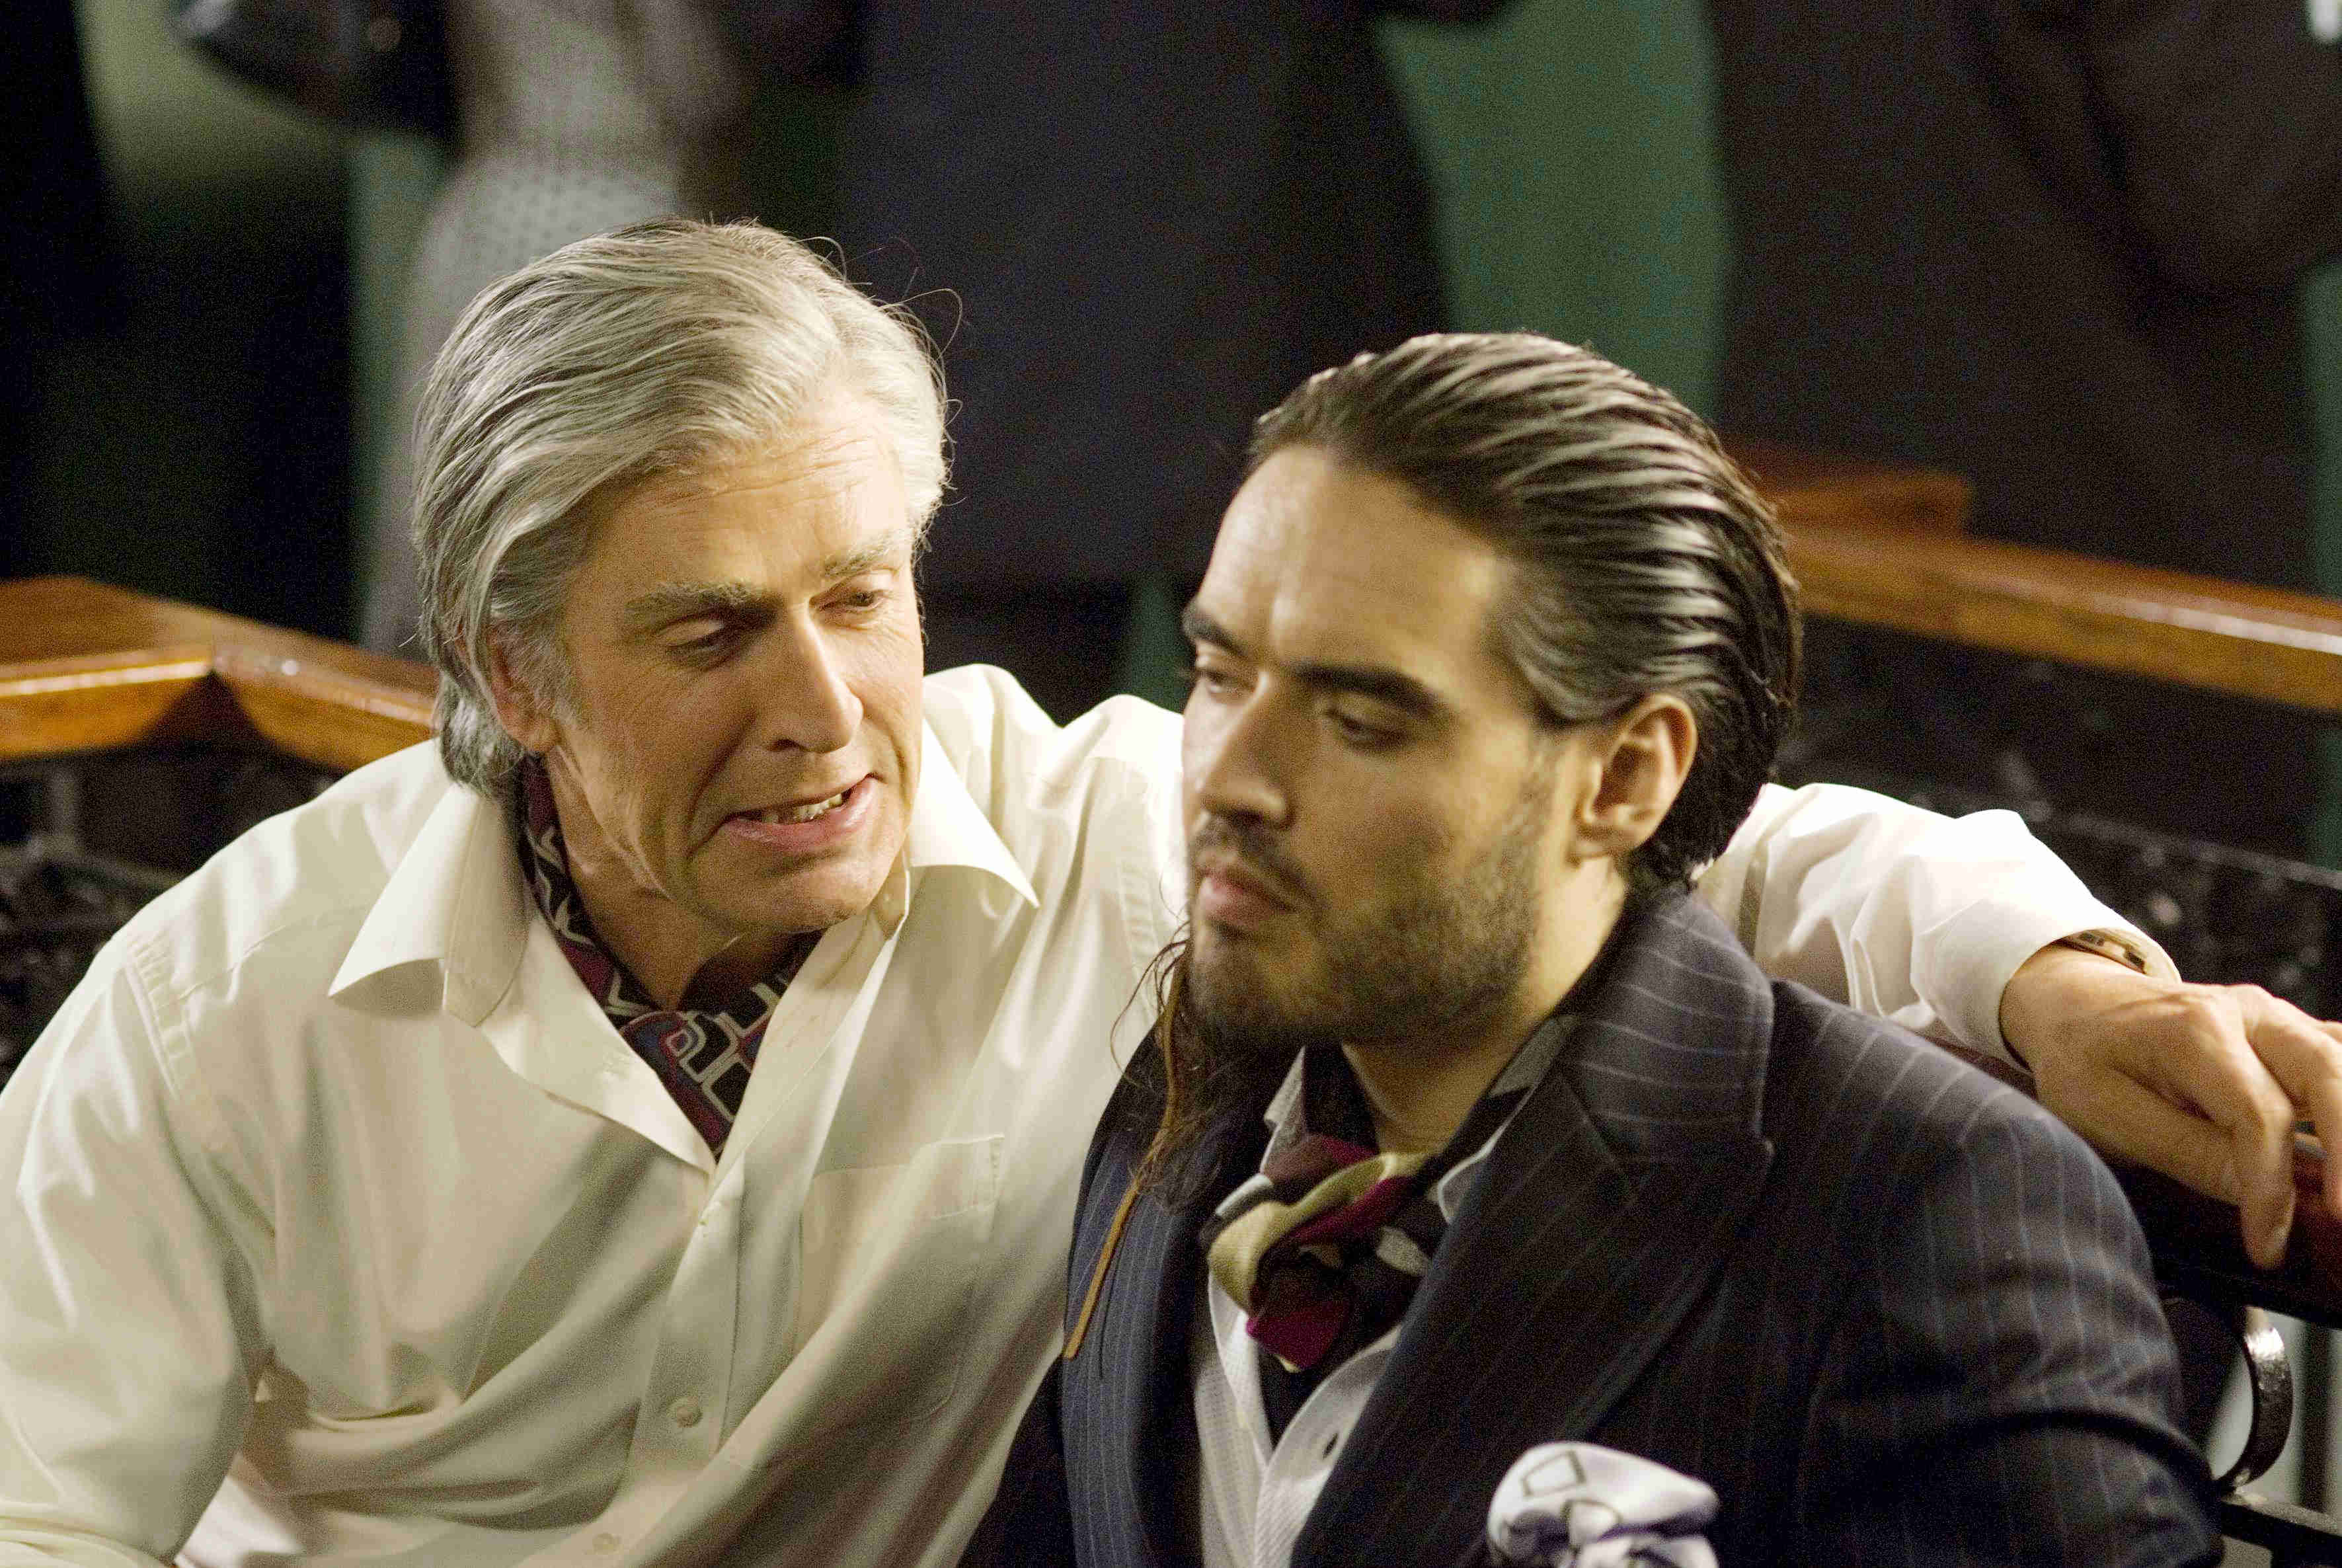 Rupert Everett stars as Carnaby Fritton and Russell Brand stars as Flash in NeoClassics Films' St. Trinian's (2009)